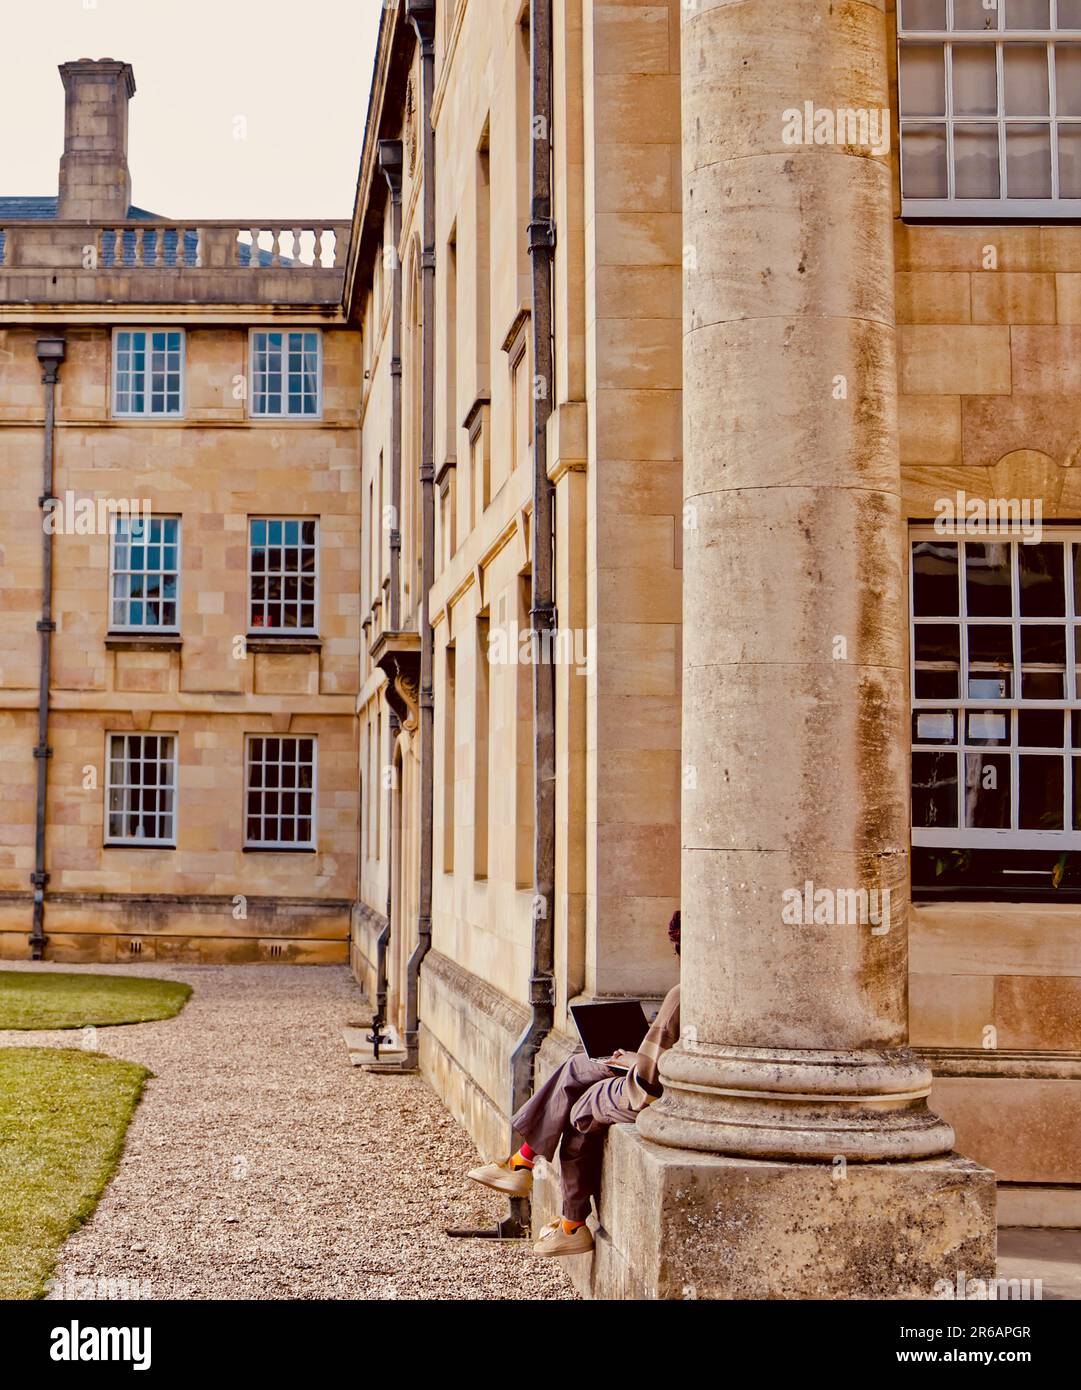 Studying outside alone at a college in Cambridge Stock Photo